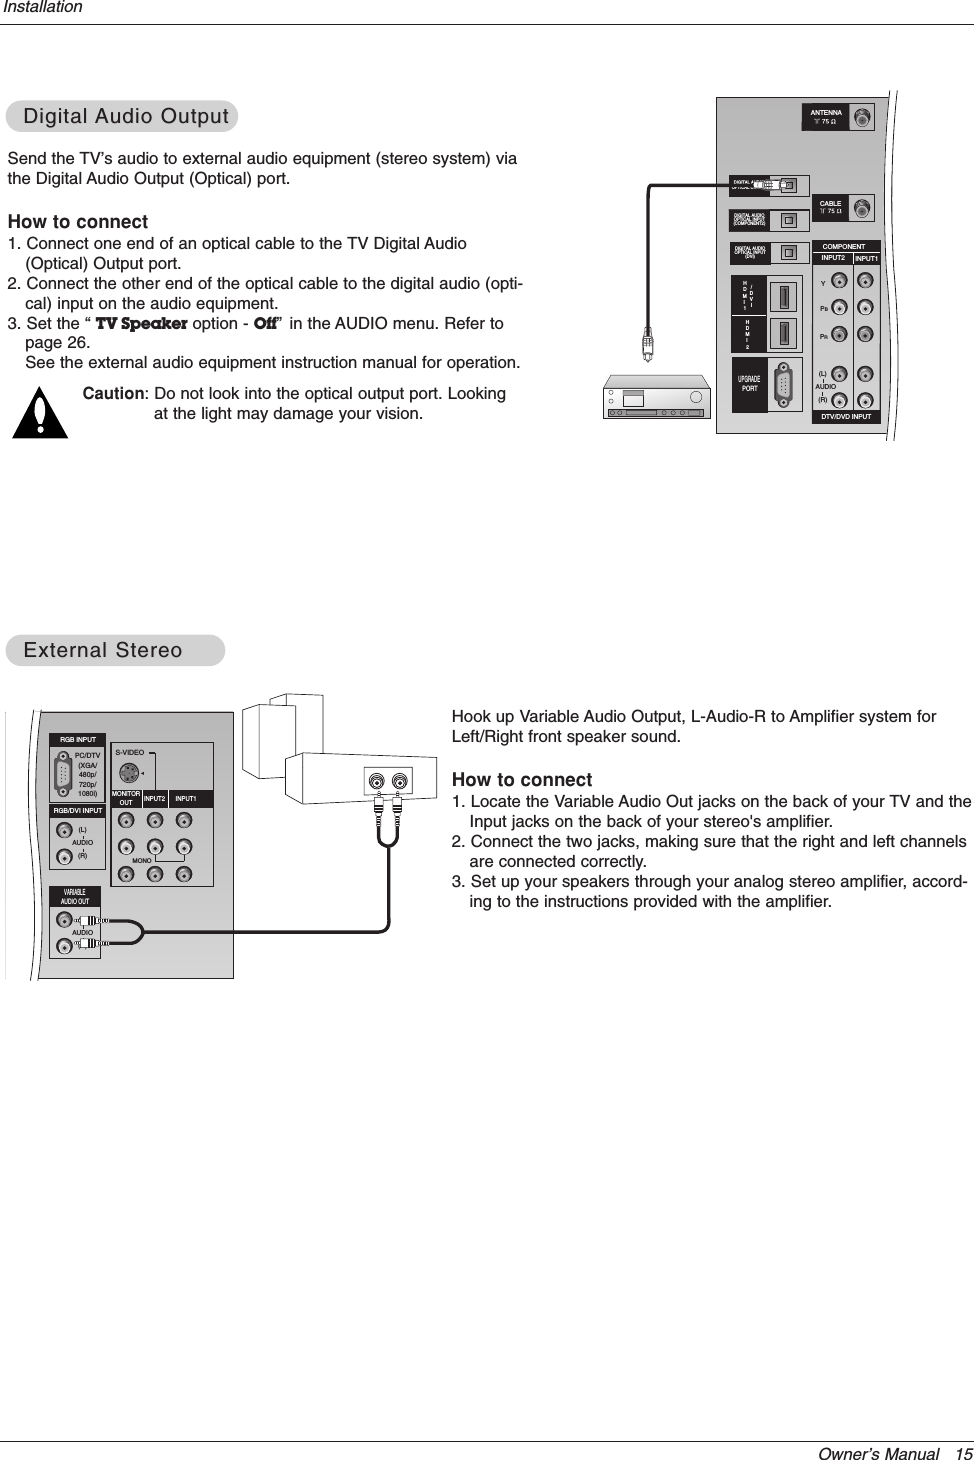 Owner’s Manual   15InstallationSend the TV’s audio to external audio equipment (stereo system) viathe Digital Audio Output (Optical) port.How to connect1. Connect one end of an optical cable to the TV Digital Audio(Optical) Output port.2. Connect the other end of the optical cable to the digital audio (opti-cal) input on the audio equipment.3. Set the “ TV Speaker option - Off”in the AUDIO menu. Refer topage 26.See the external audio equipment instruction manual for operation.Caution: Do not look into the optical output port. Lookingat the light may damage your vision.Digital Digital Audio OutputAudio OutputCABLECARD DVI HDMIPR PBYCOMPONENTINPUT2 INPUT1DTV/DVD INPUT(L)(R)AUDIODIGITAL AUDIOOPTICAL INPUT(COMPONENT2)DIGITAL AUDIOOPTICAL INPUT(DVI)DIGITAL AUDIO OPTICAL OUTPUTANTENNAHDMI 1UPGRADEPORTCABLE/DVIHDMI 2Hook up Variable Audio Output, L-Audio-R to Amplifier system forLeft/Right front speaker sound.How to connect1. Locate the Variable Audio Out jacks on the back of your TV and theInput jacks on the back of your stereo&apos;s amplifier.2. Connect the two jacks, making sure that the right and left channelsare connected correctly.3. Set up your speakers through your analog stereo amplifier, accord-ing to the instructions provided with the amplifier.External StereoExternal StereoS-VIDEOMONORGB INPUTRGB/DVI INPUT(L)(R)AUDIO(L)(R)AUDIOMONITOROUT INPUT2 INPUT1VARIABLEAUDIO OUTPC/DTV(XGA/480p/720p/1080i)